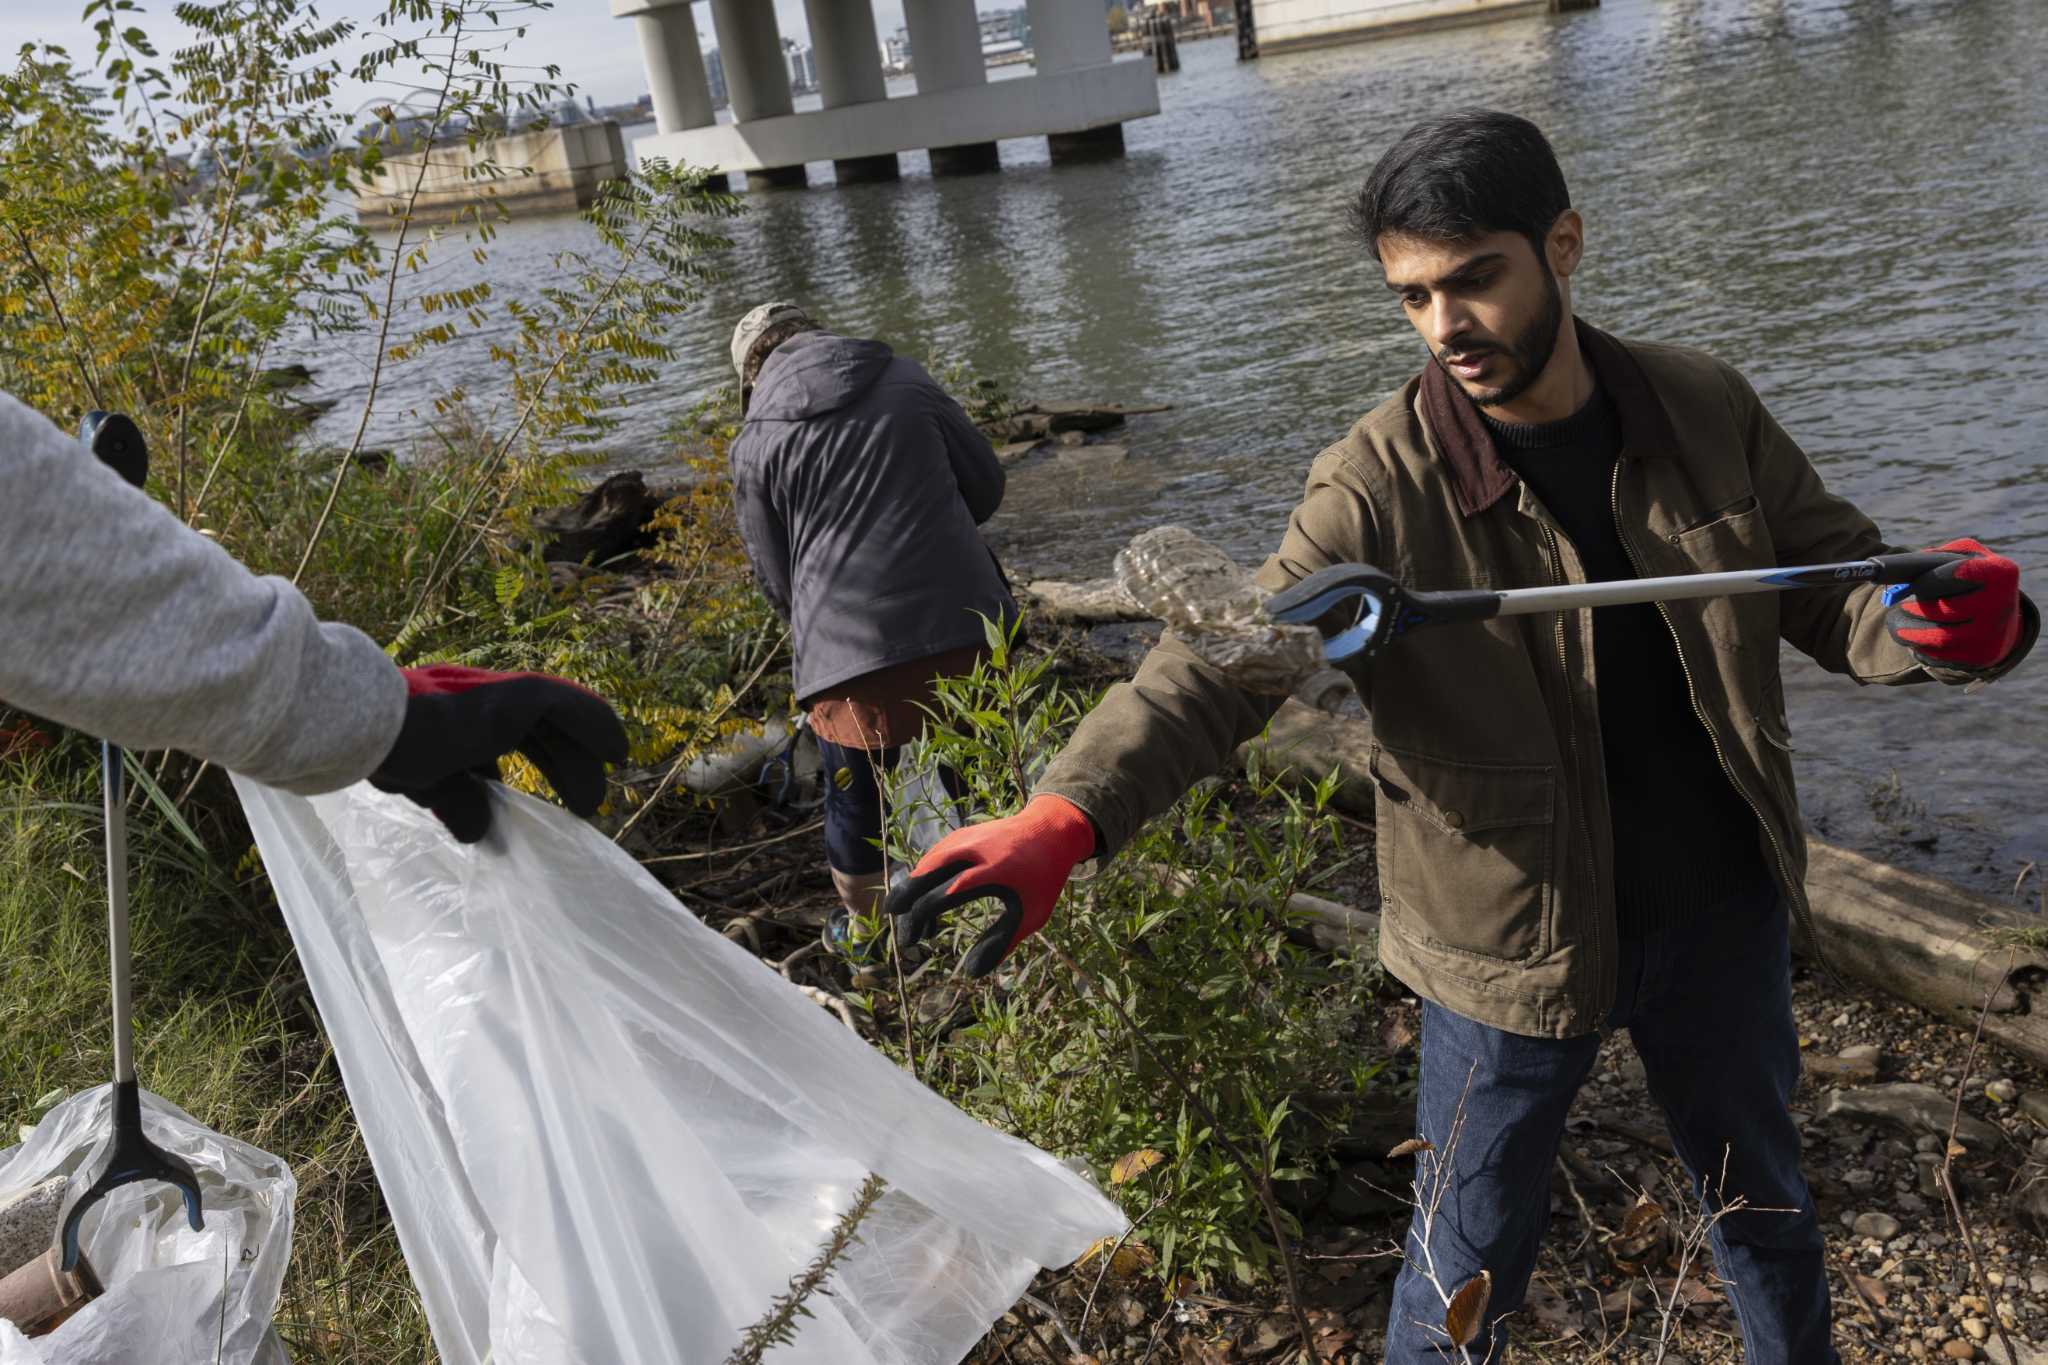 In Washington, D.C., the city’s ‘forgotten river’ cleans up, slowly